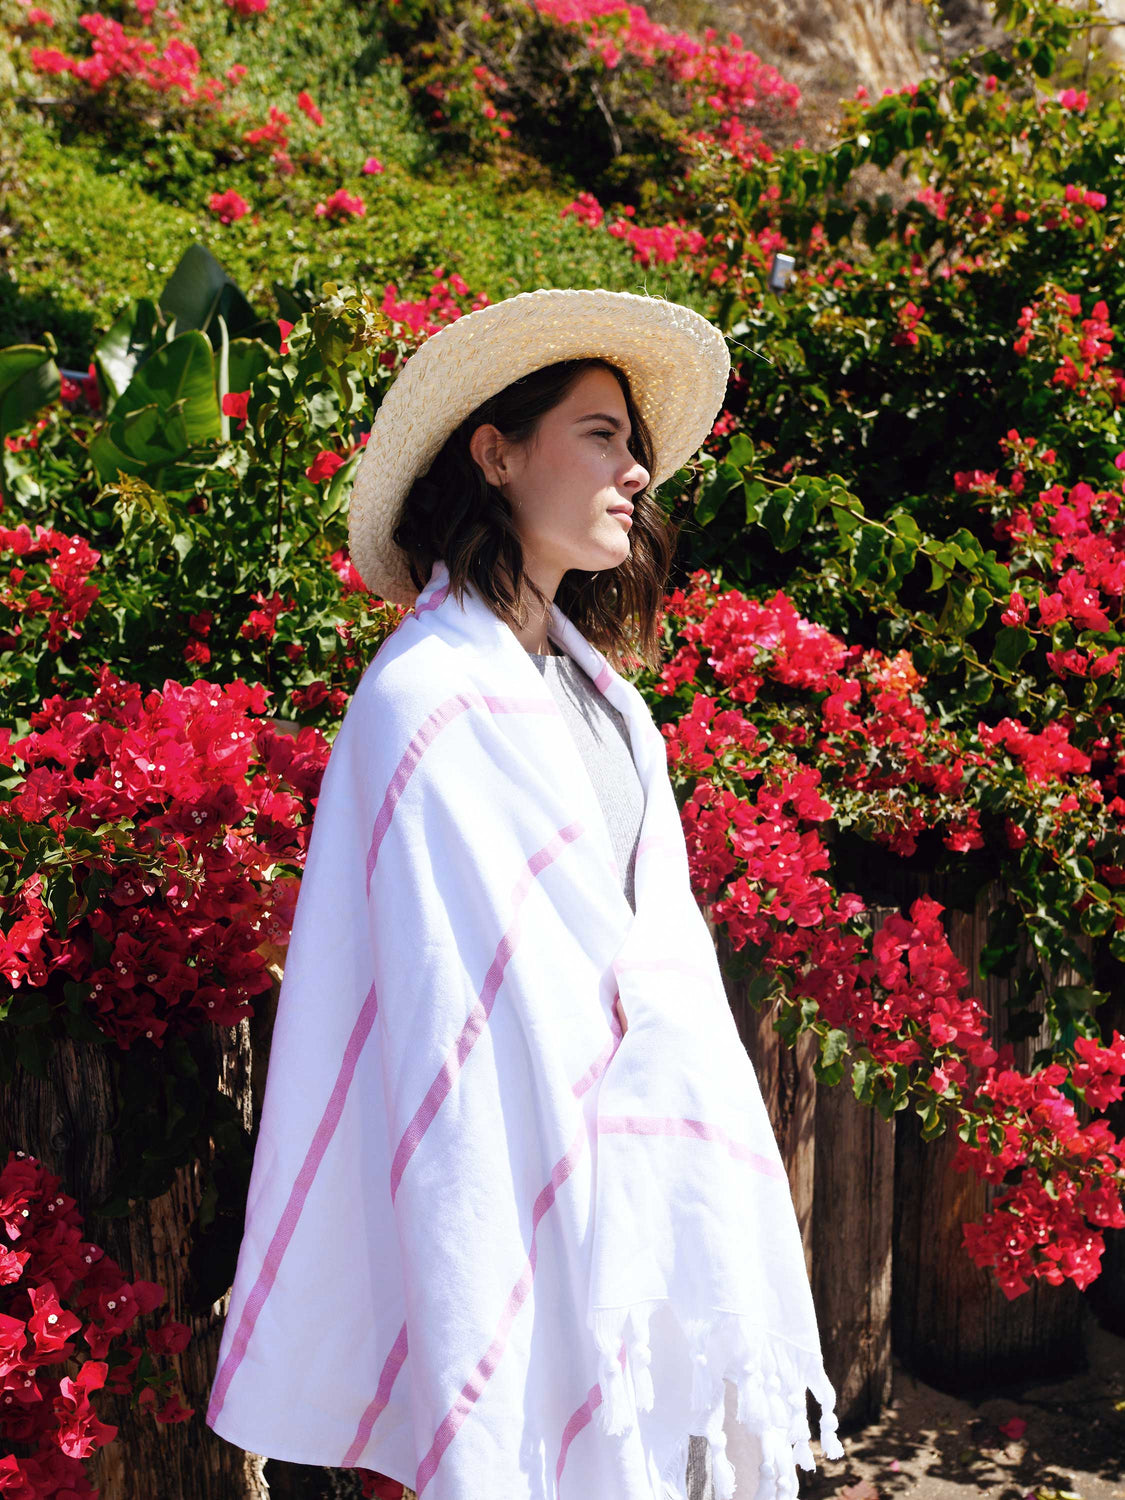 A woman standing in front of a hill of flowers, wrapped in an oversized, white and pink striped Turkish towel.